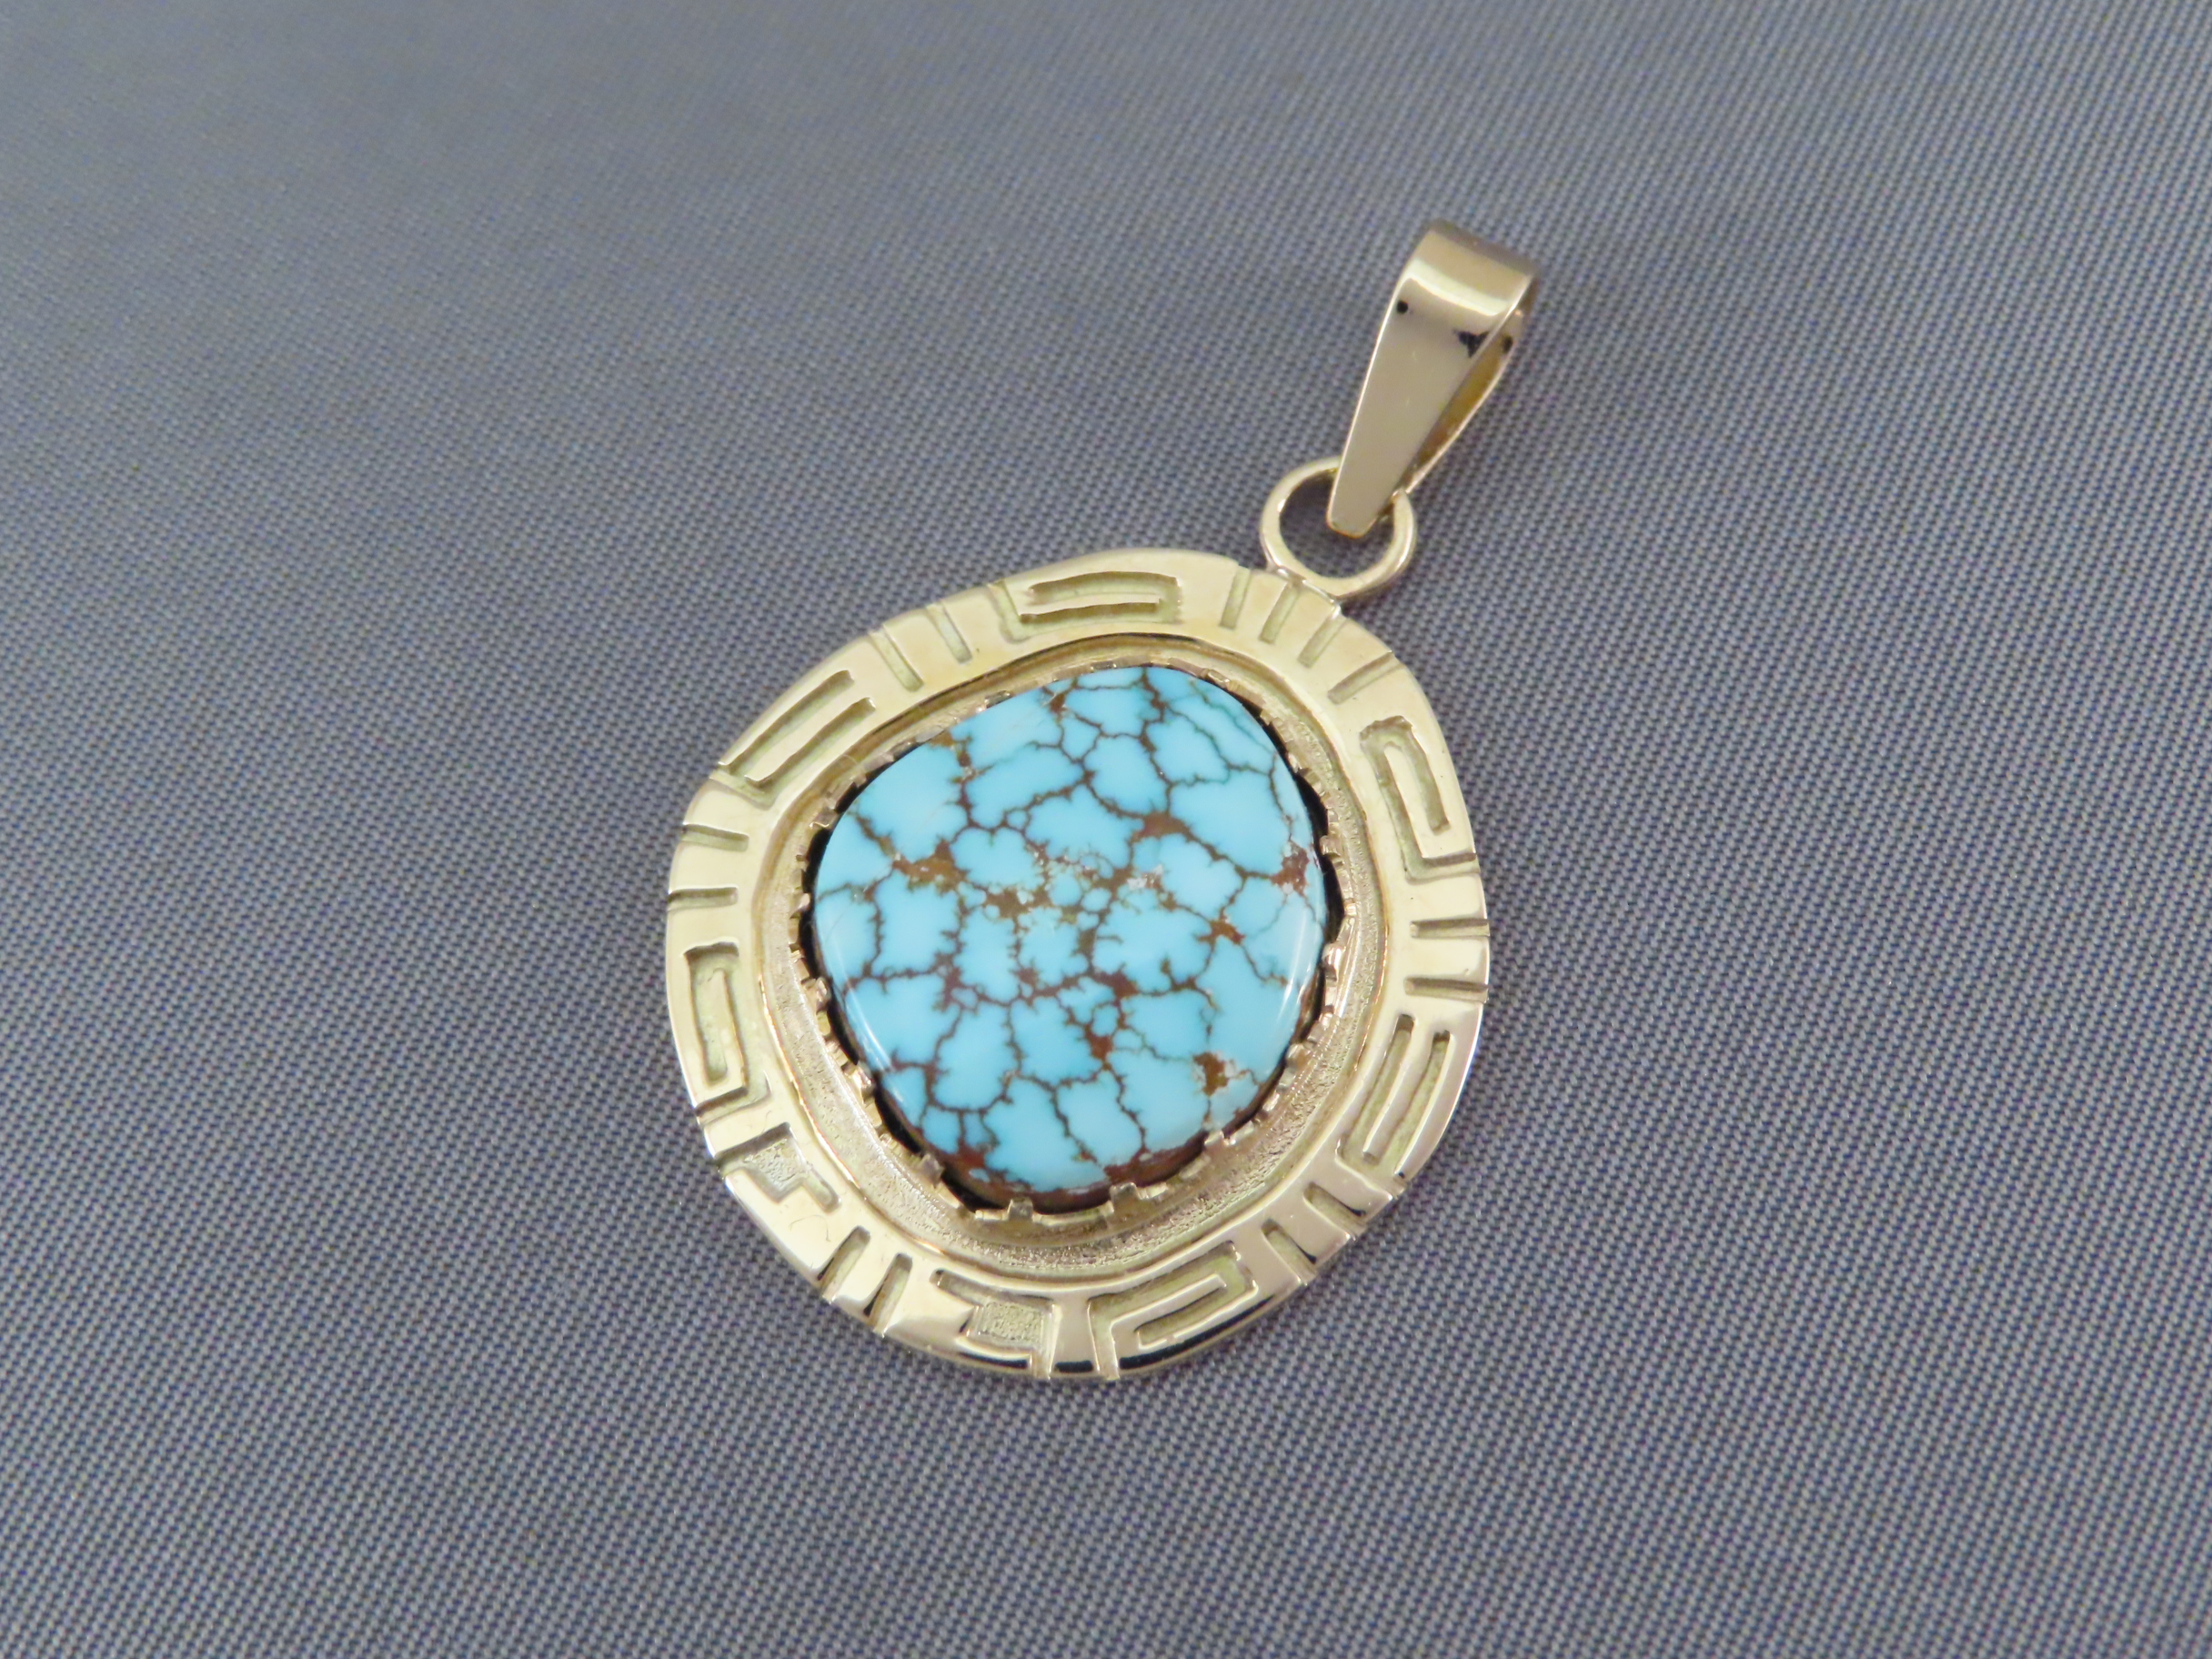 Gold & Turquoise - Number Eight Turquoise Slider Pendant in 14kt GOLD by Navajo jeweler, Robert Taylor $1,525- FOR SALE